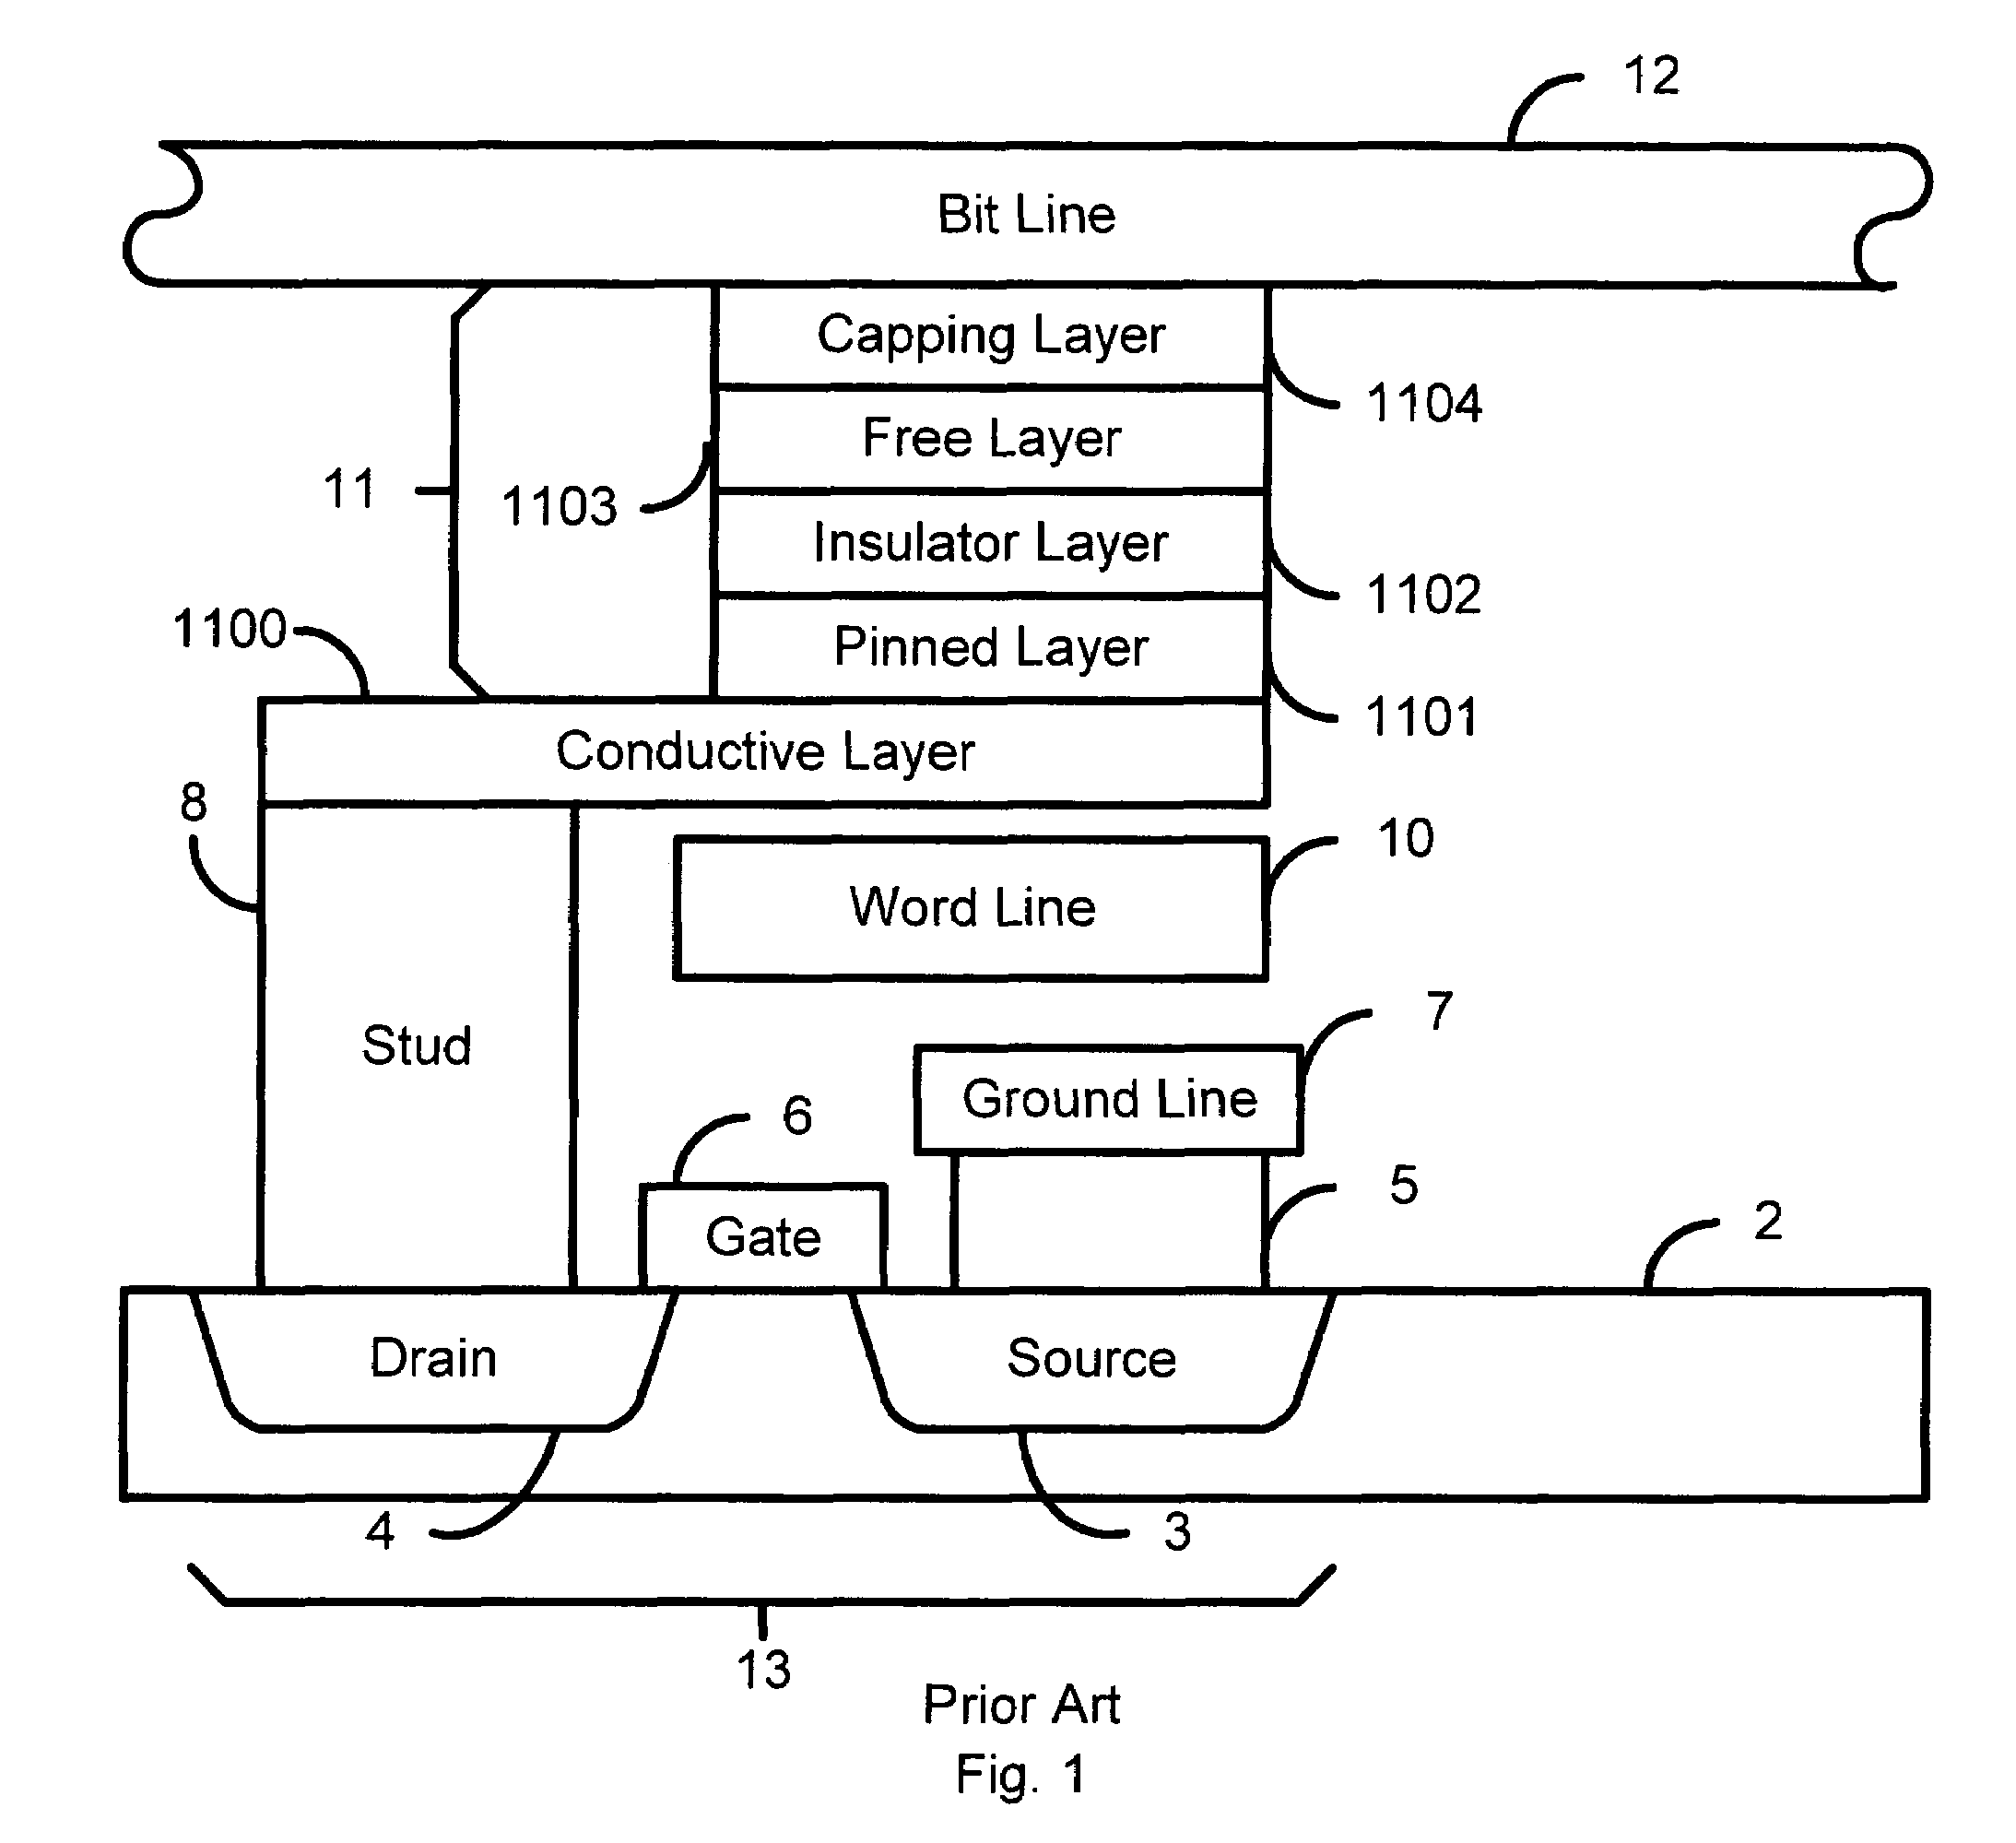 MRAM architecture and a method and system for fabricating MRAM memories utilizing the architecture